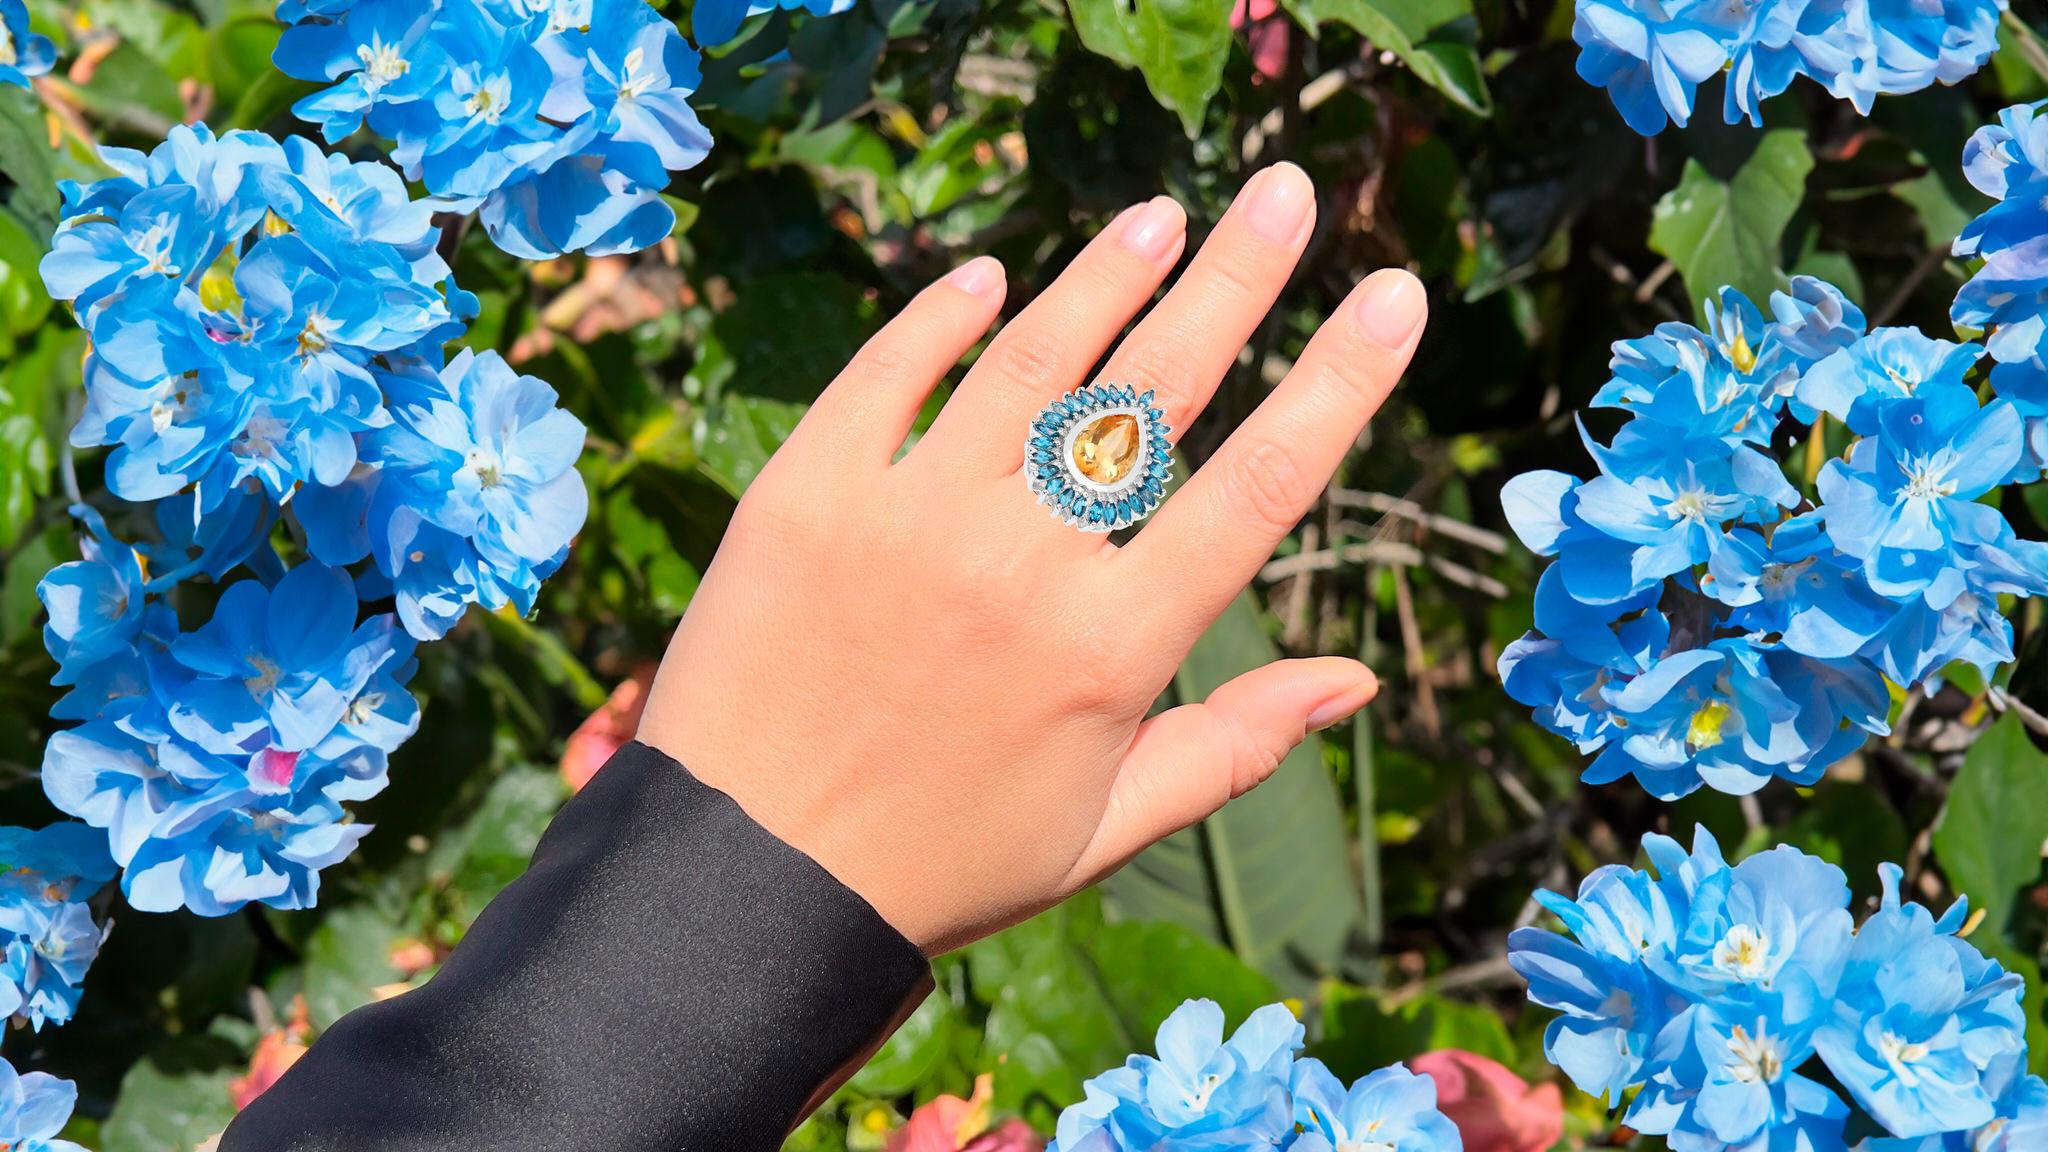 It comes with the Gemological Appraisal by GIA GG/AJP
All Gemstones are Natural
Citrine = 5.20 Carat
Stone Size: 15 x 10 mm
Cut: Pear
London Blue Topazes = 2.30 Carats
Cut: Marquise
Metal: Rhodium Plated Sterling Silver
Ring Size: 9* US
*It can be